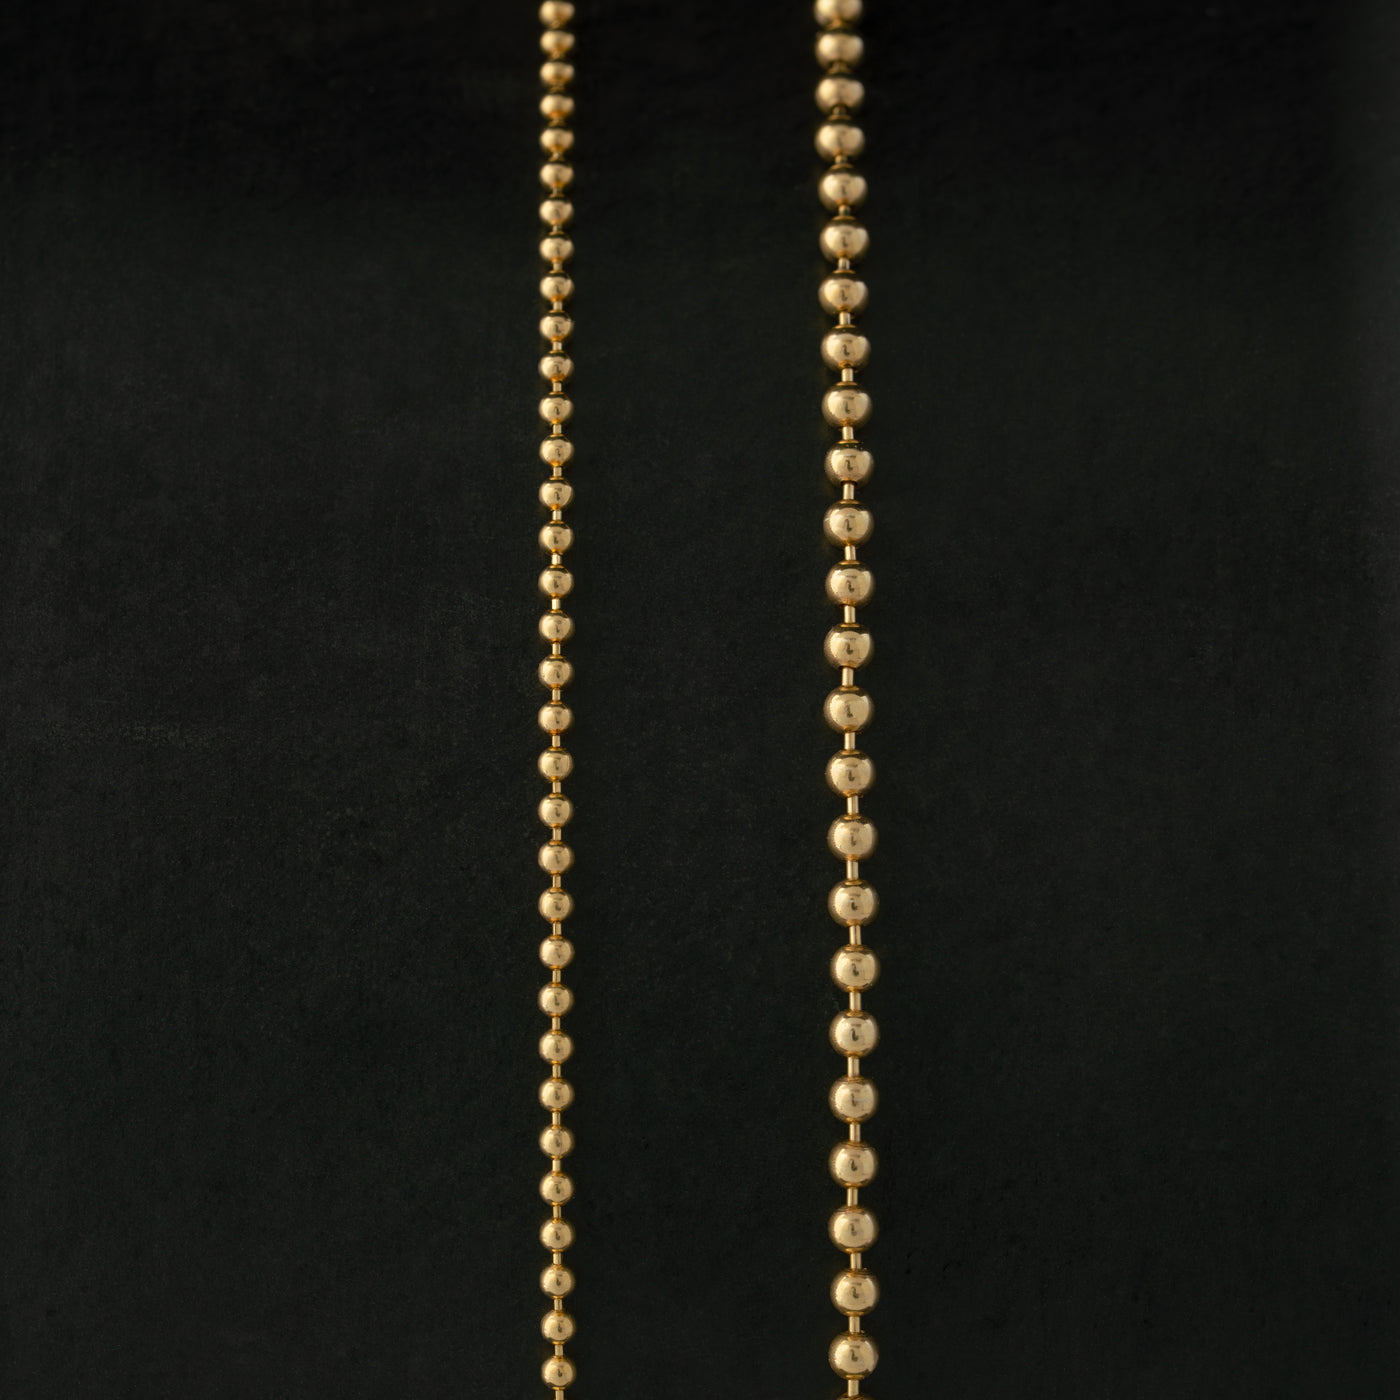 14K SOLID GOLD BALL CHAIN